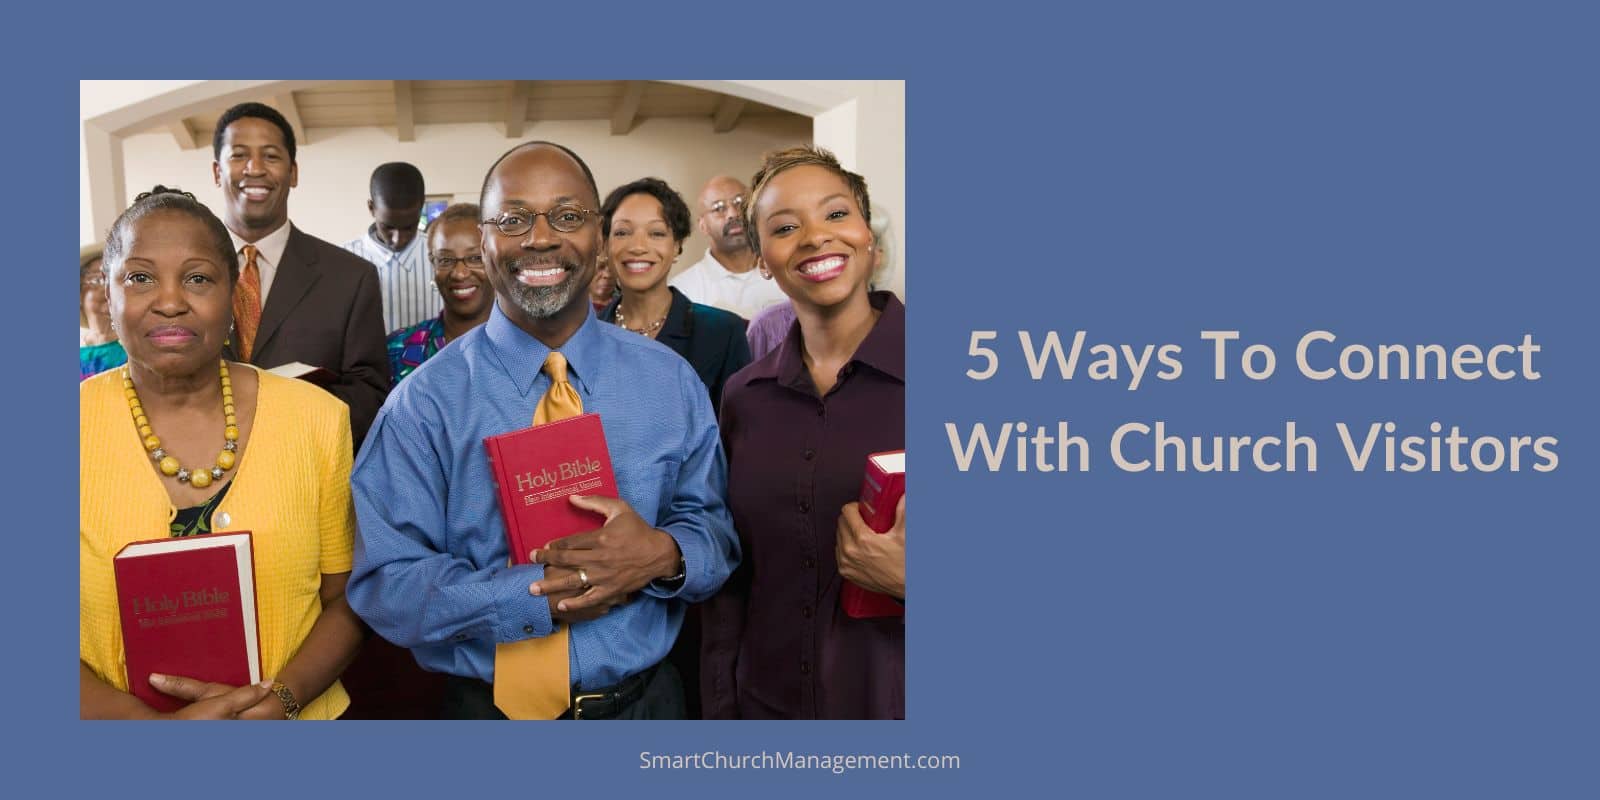 How to connect with church visitors